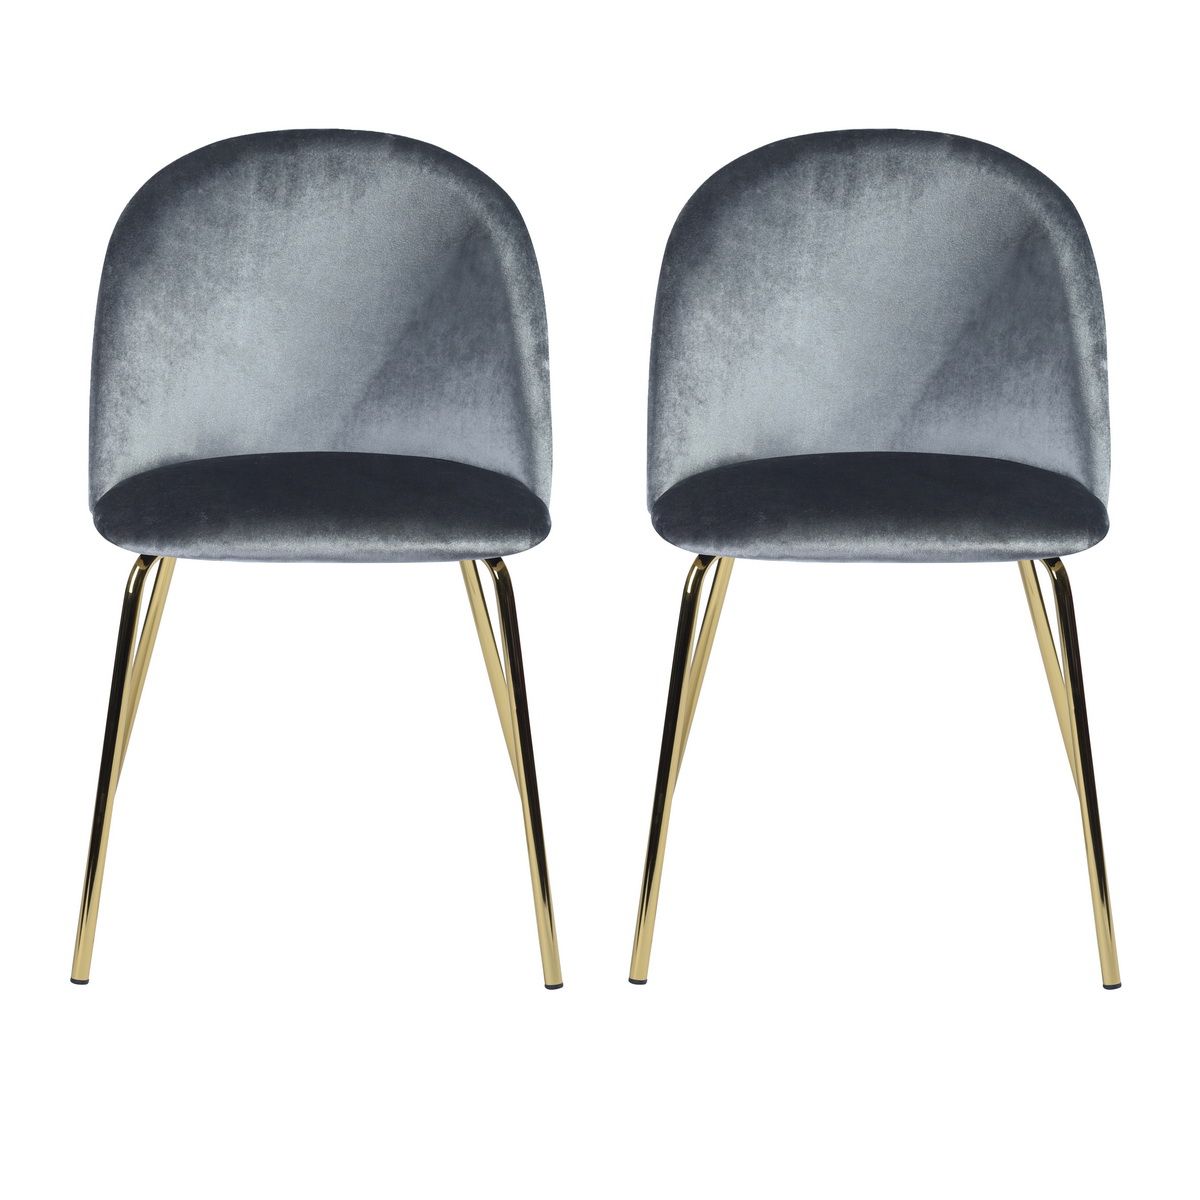 Furniturer Grey Velvet With Gold Metal Legs Dining Chair, Zomba,set Of In Round Gray And Black Velvet Ottomans Set Of  (View 14 of 20)